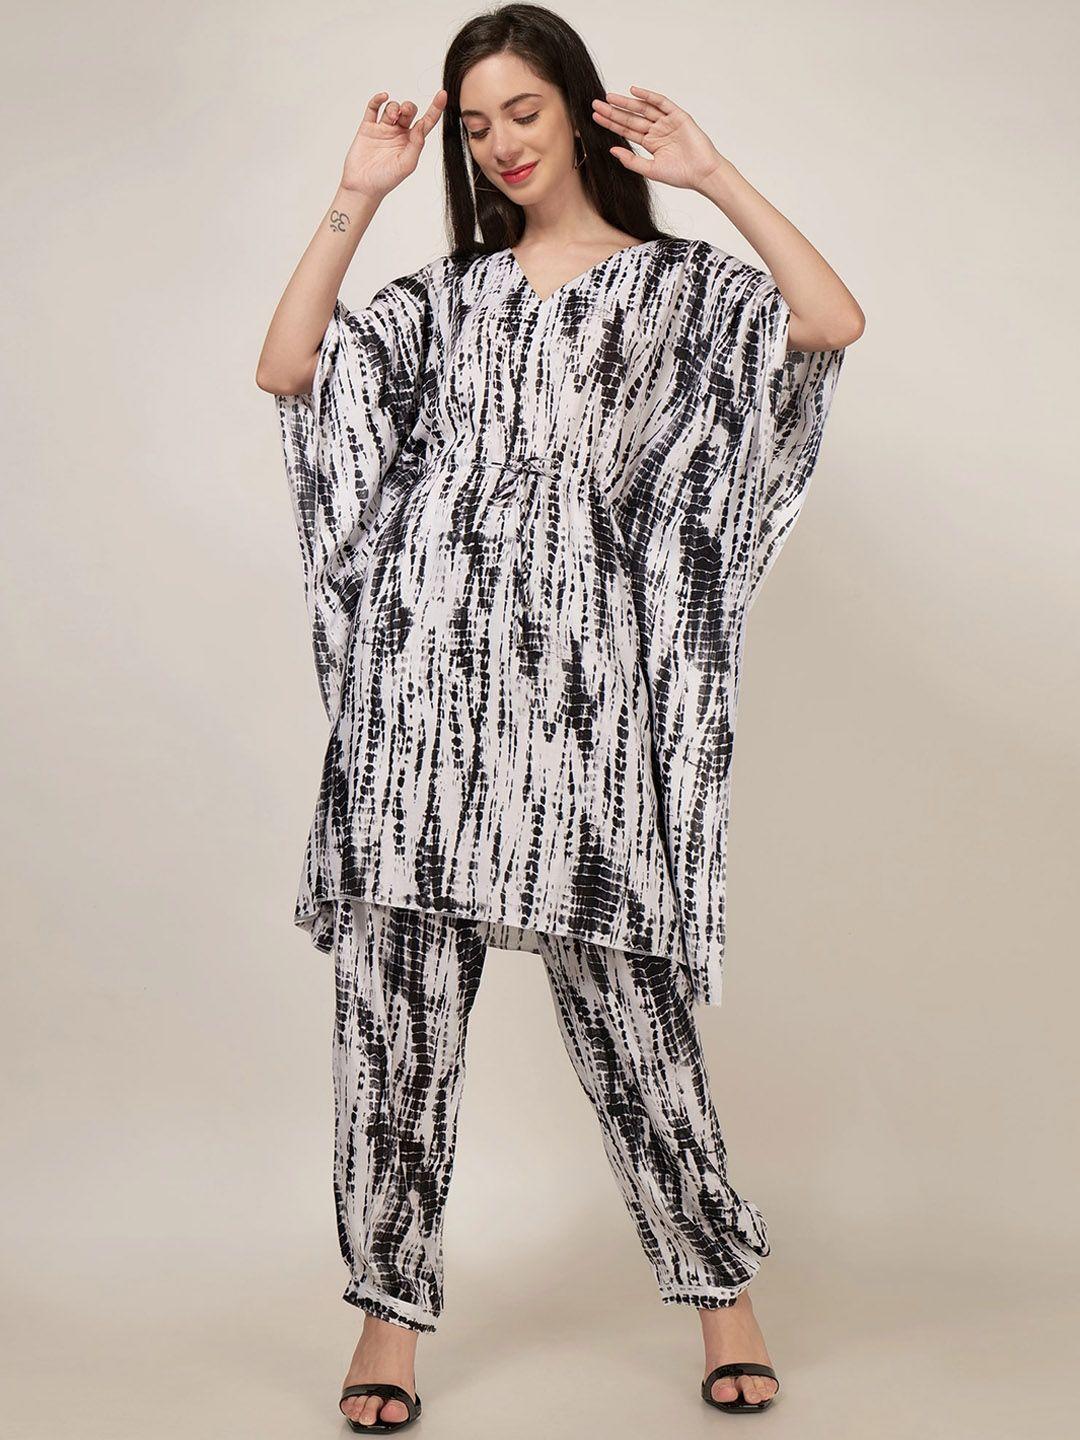 patrorna tie-dyed kaftan top & trousers co-ords